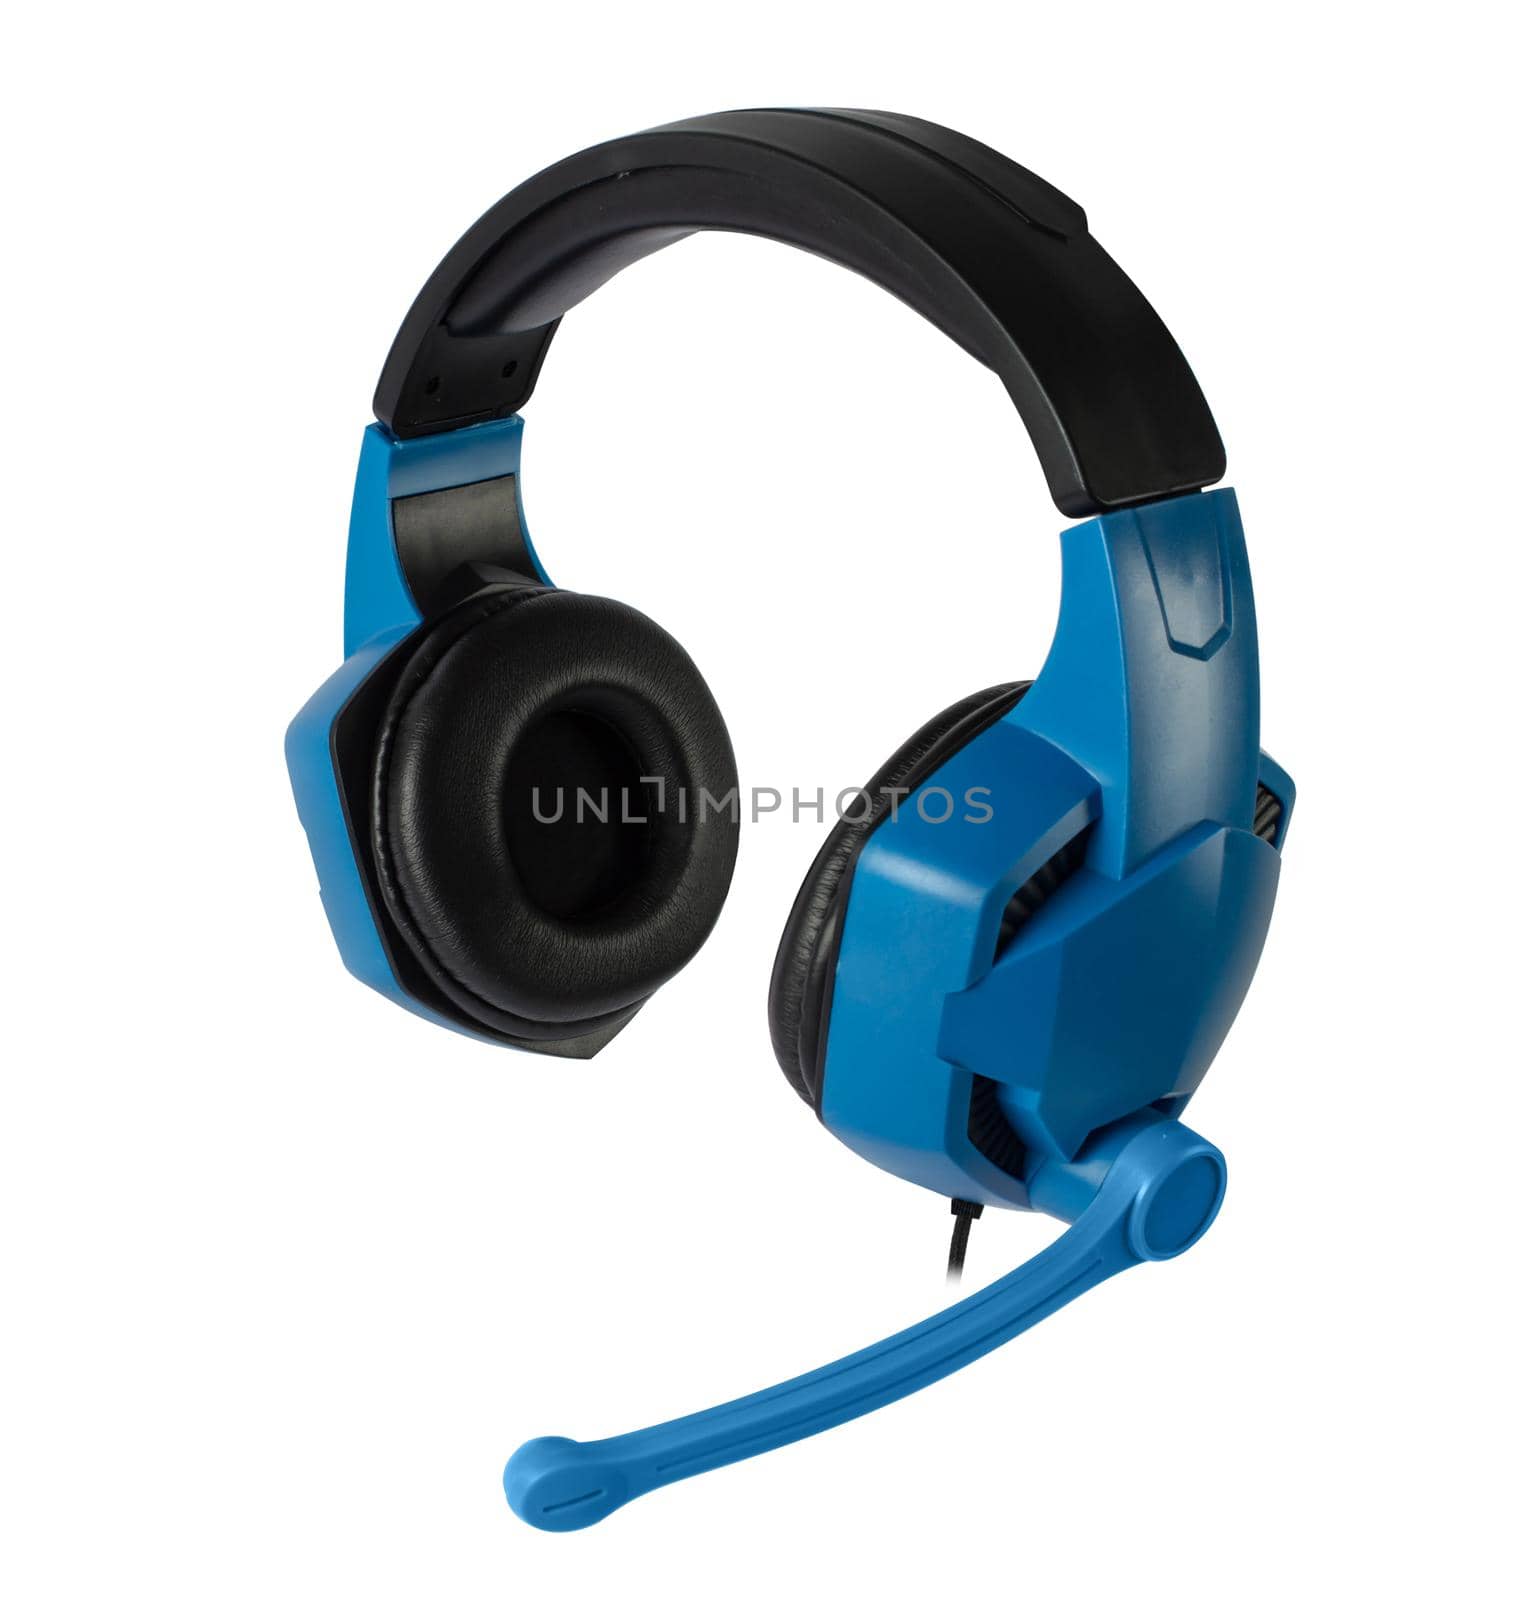 headphones for a computer with a microphone on a white background in isolation